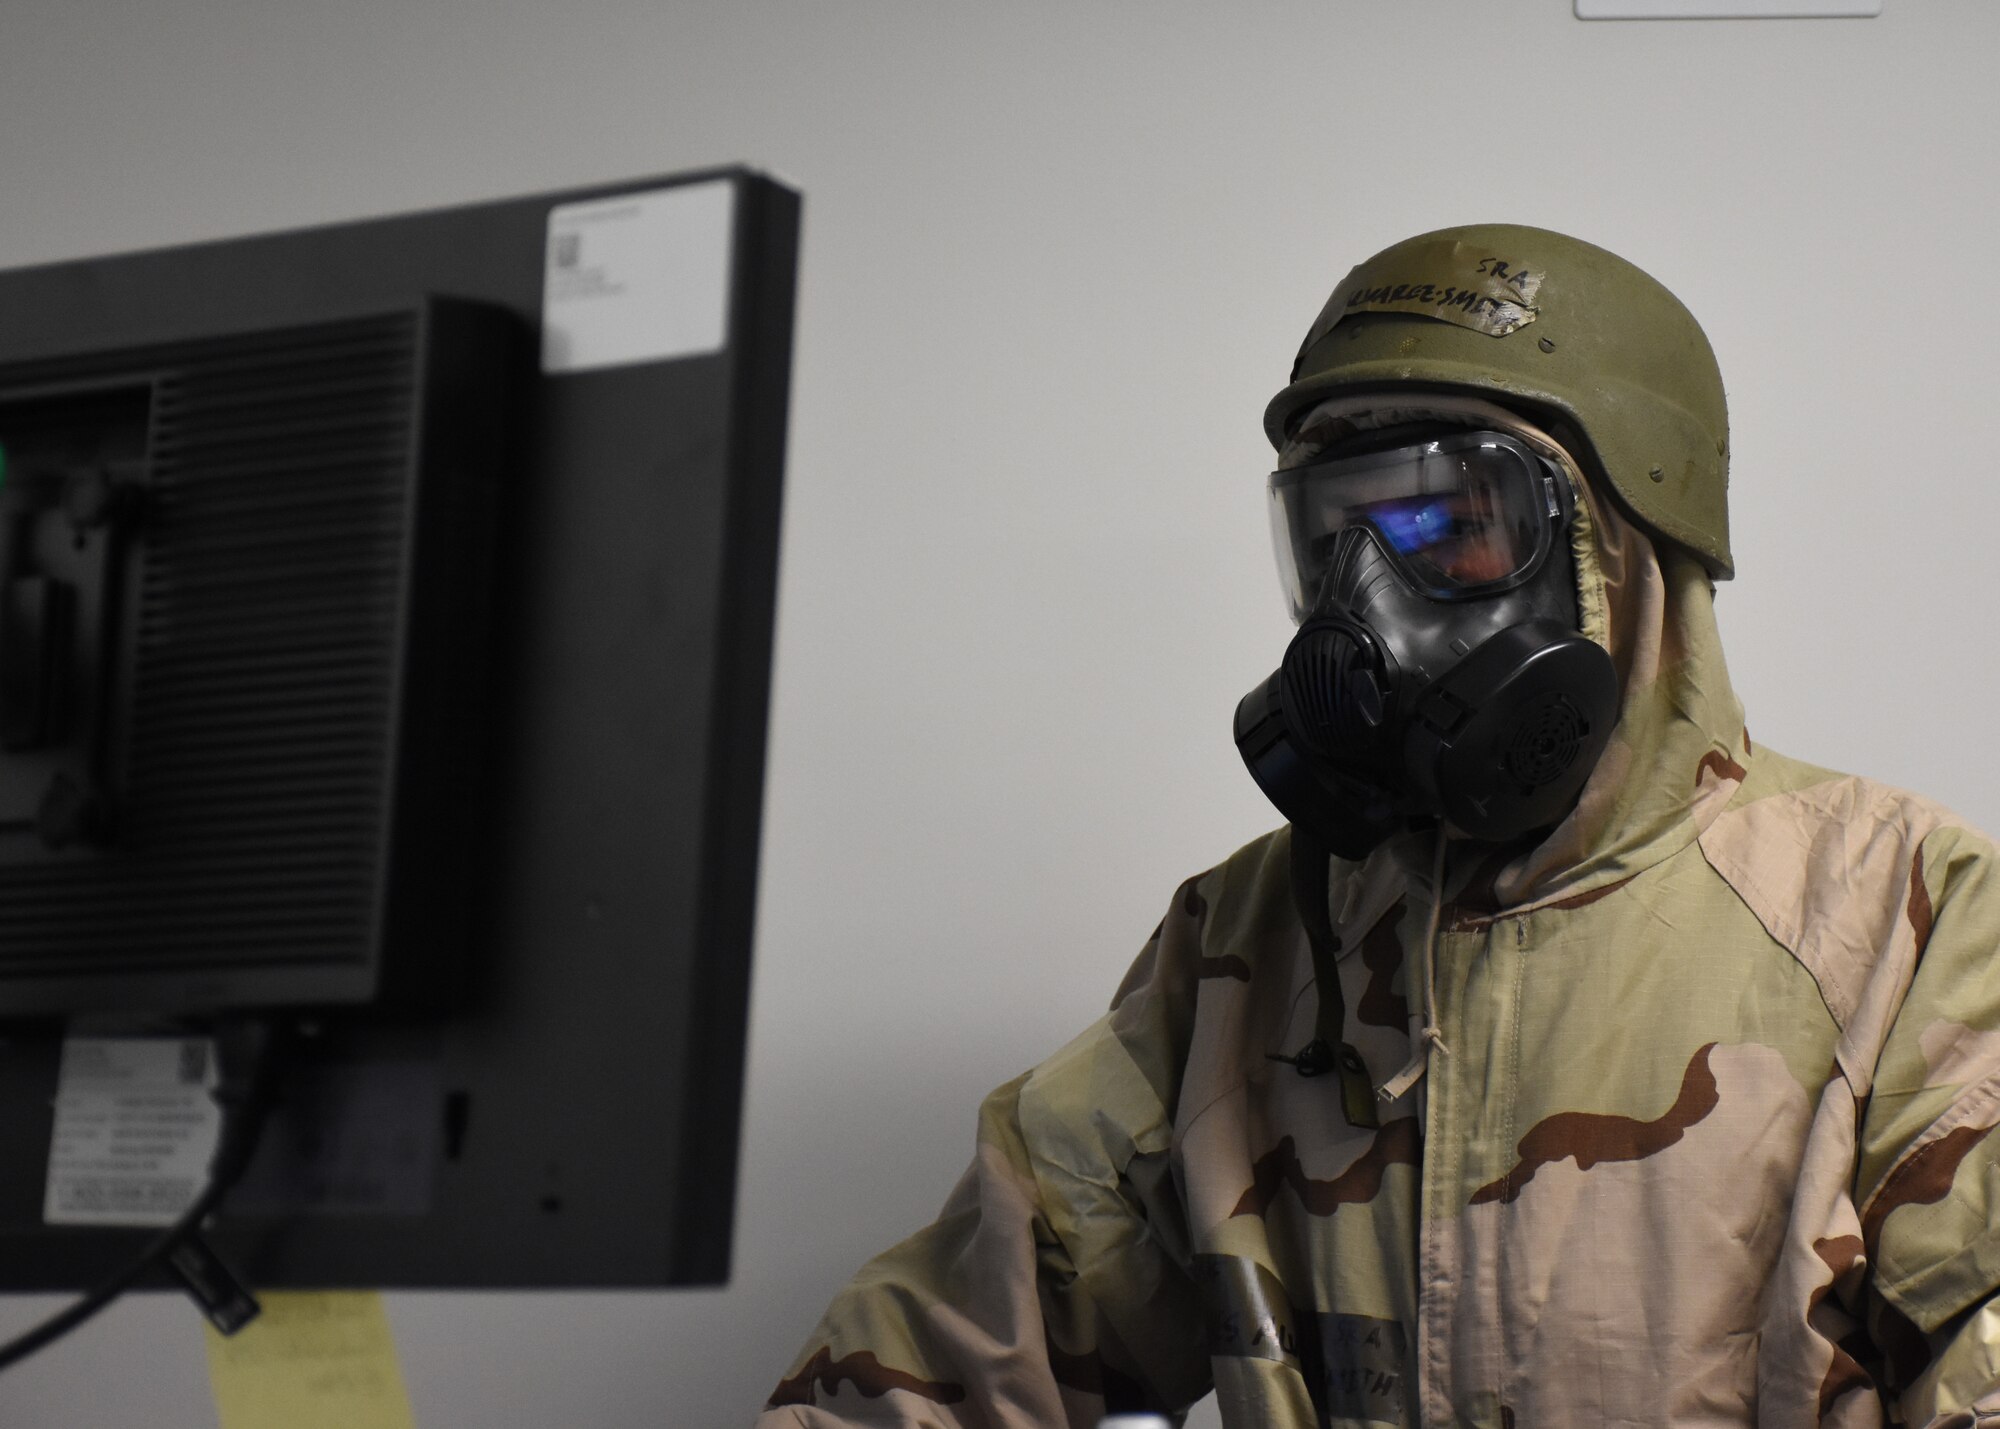 Senior Airman Hayes Alvarez-Smith, a client systems technician with the 442d Communications Flight, handles a simulated emergency event at Whiteman Air Force Base, Mo., Nov. 3, 2019. As part of the emergency event, Smith performed system troubleshooting to ensure an integral part of base operations could continue after the network connection was lost.